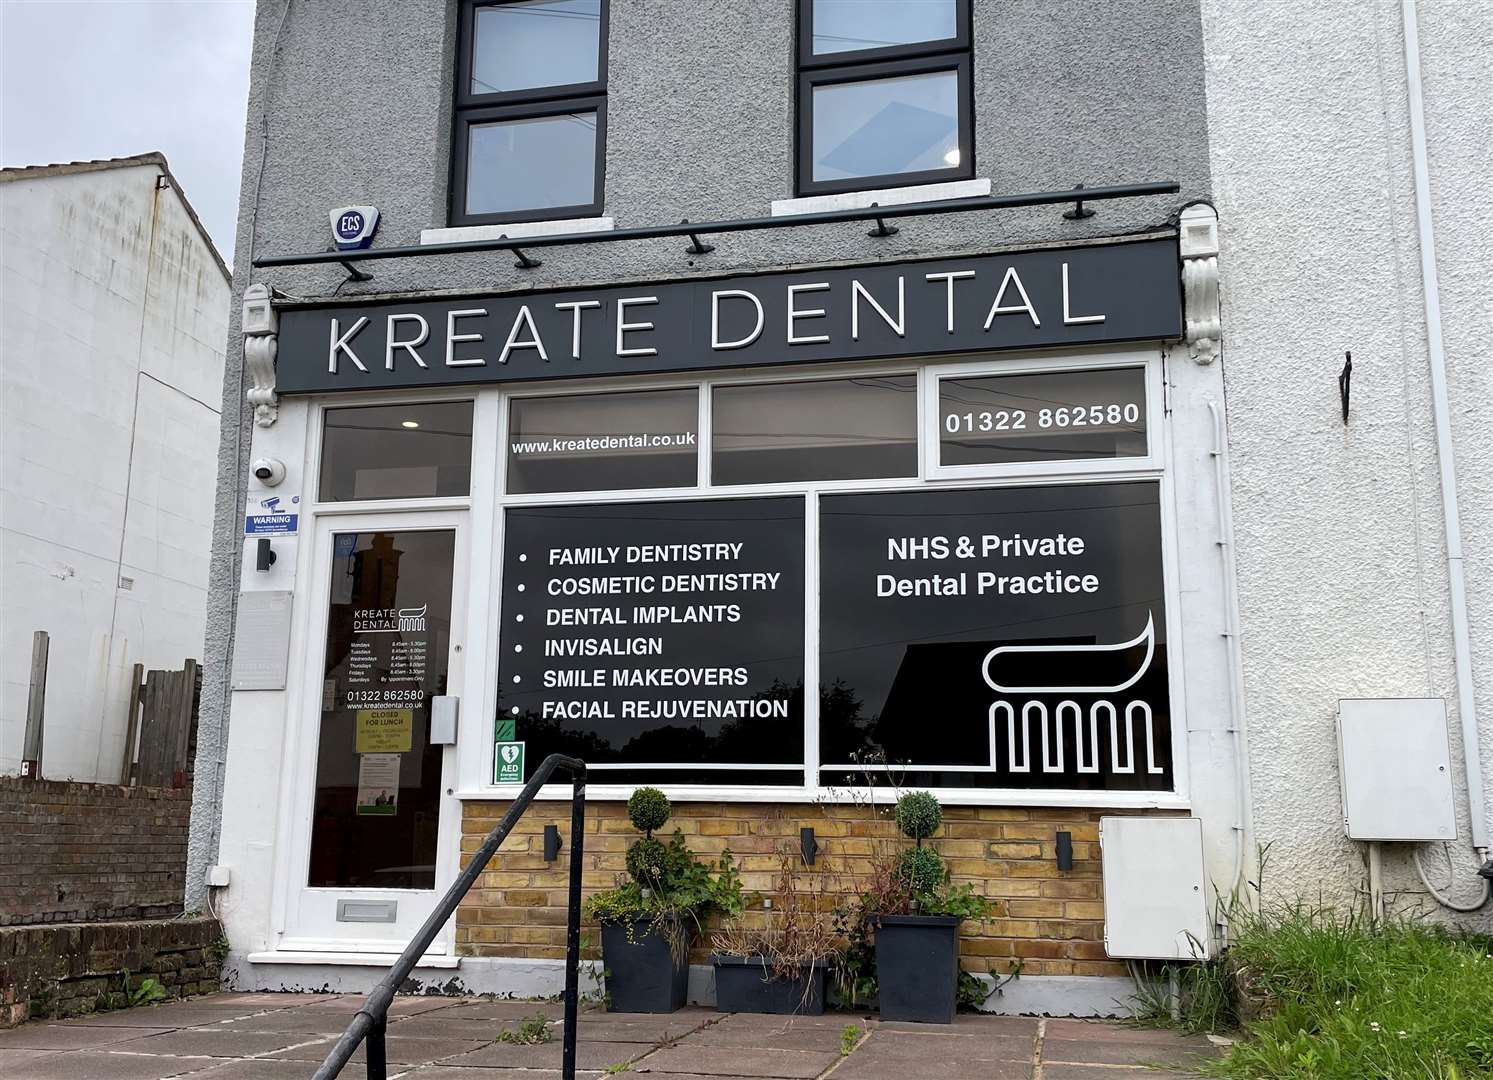 The new surgery will become part of the Kreate Dental brand